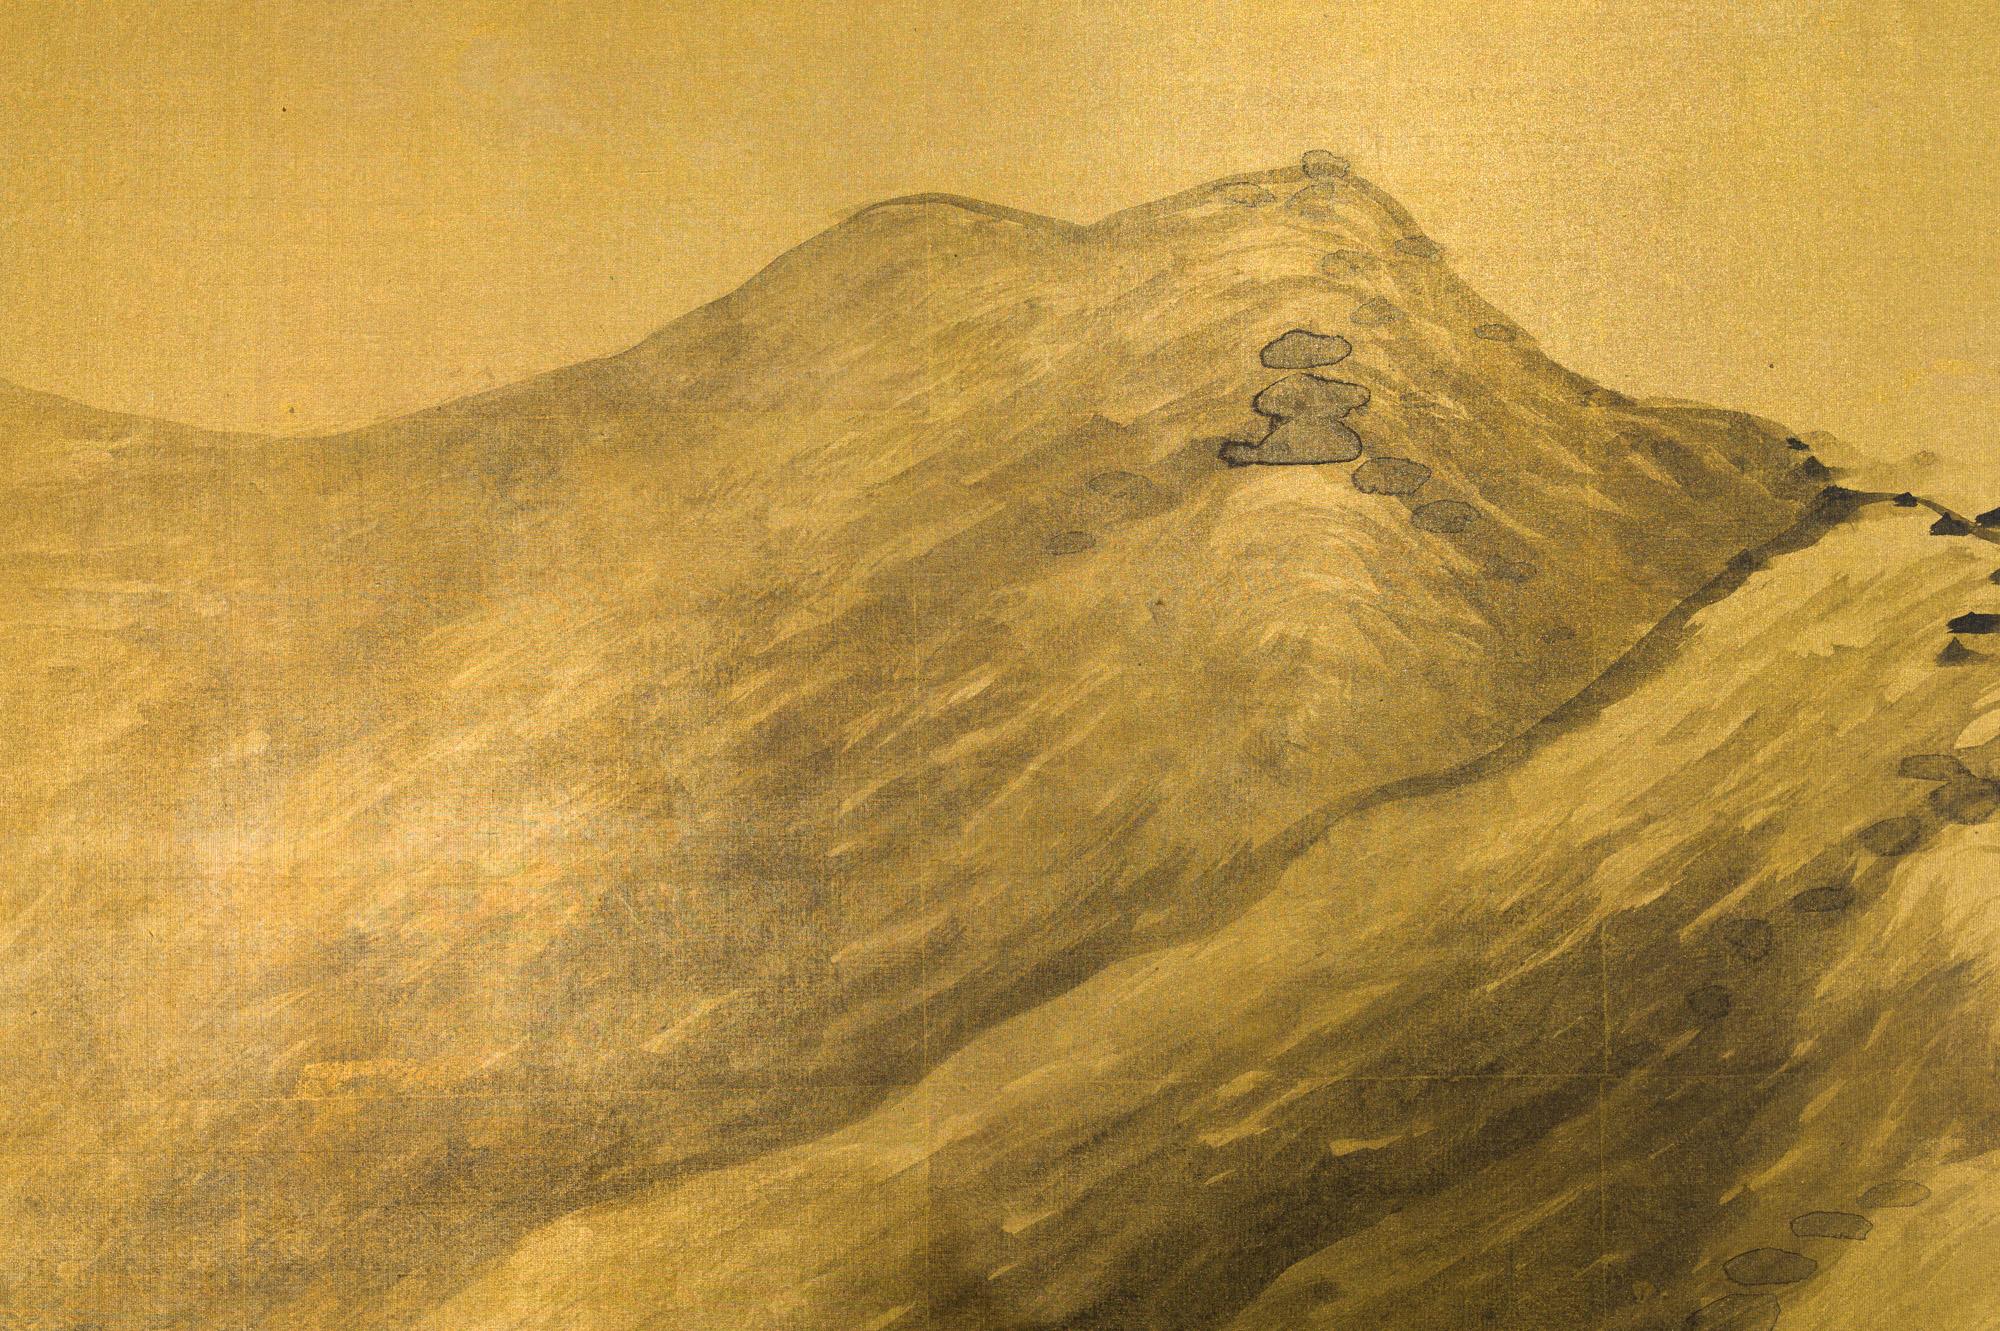 Chinese School landscape ink painting on gilded silk by Yukimatsu Shunpo, signed and dated 1924. Yukimatsu Shunpo was born in Oita in 1897 and studied under Himejima Chikugai in Osaka. He exhibited with the Teiten (future Nitten) many times and